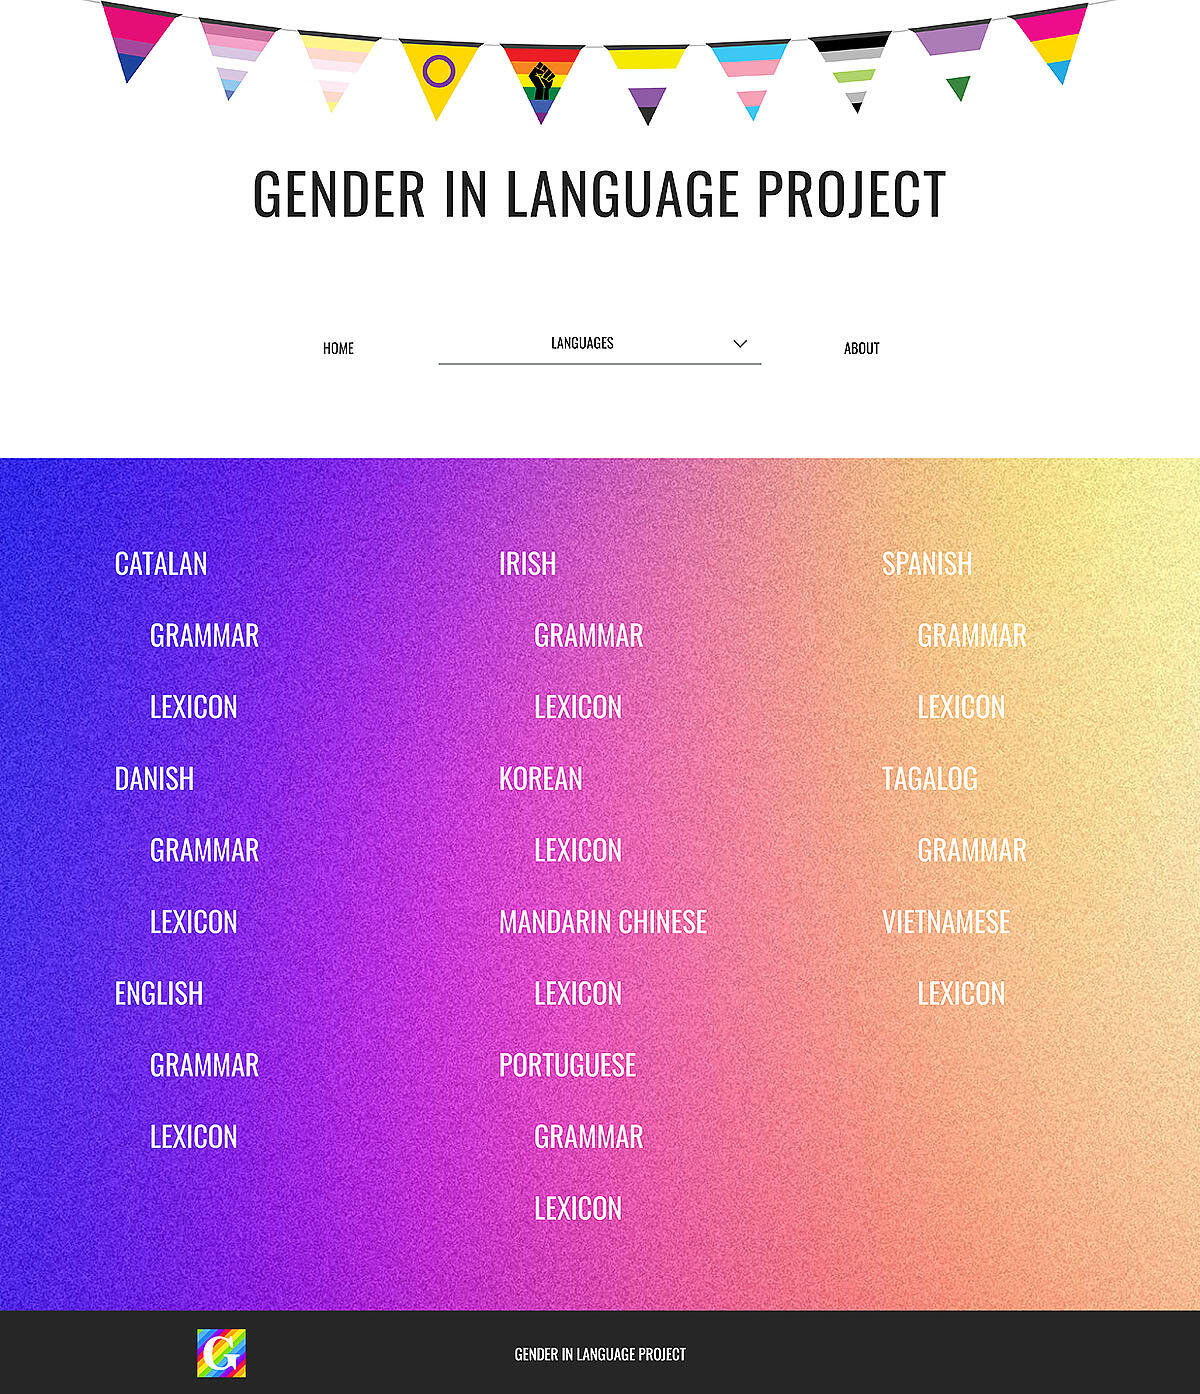 The homepage of the Gender in Language Project. (Image courtesy of Genderinlanguage.com. Captured May 30, 2022.)